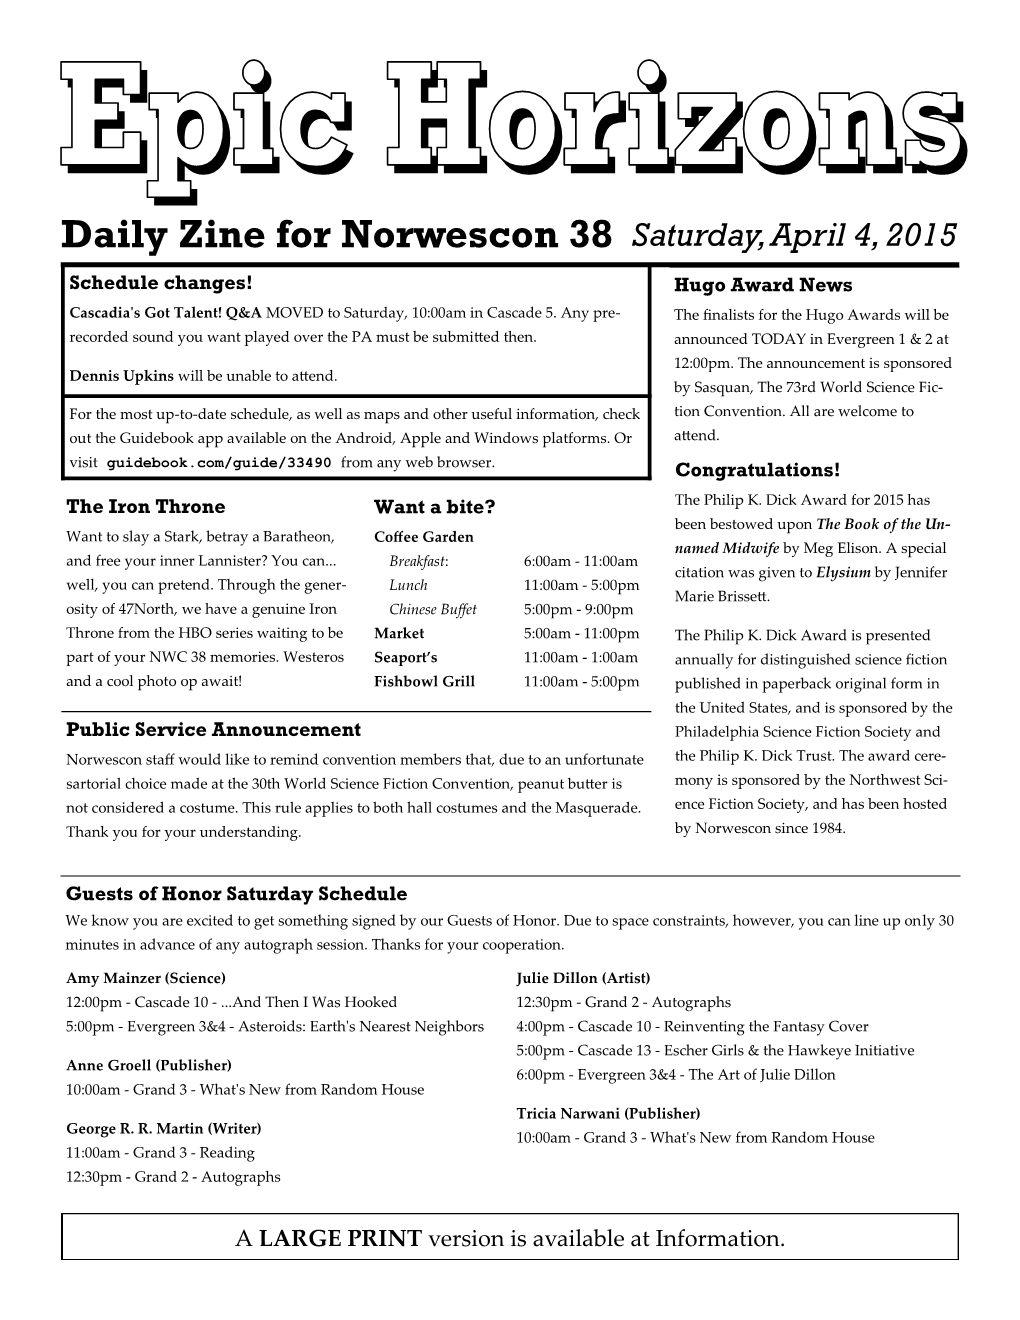 Daily Zine for Norwescon 38 Saturday, April 4, 2015 Schedule Changes! Hugo Award News Cascadia's Got Talent! Q&A MOVED to Saturday, 10:00Am in Cascade 5